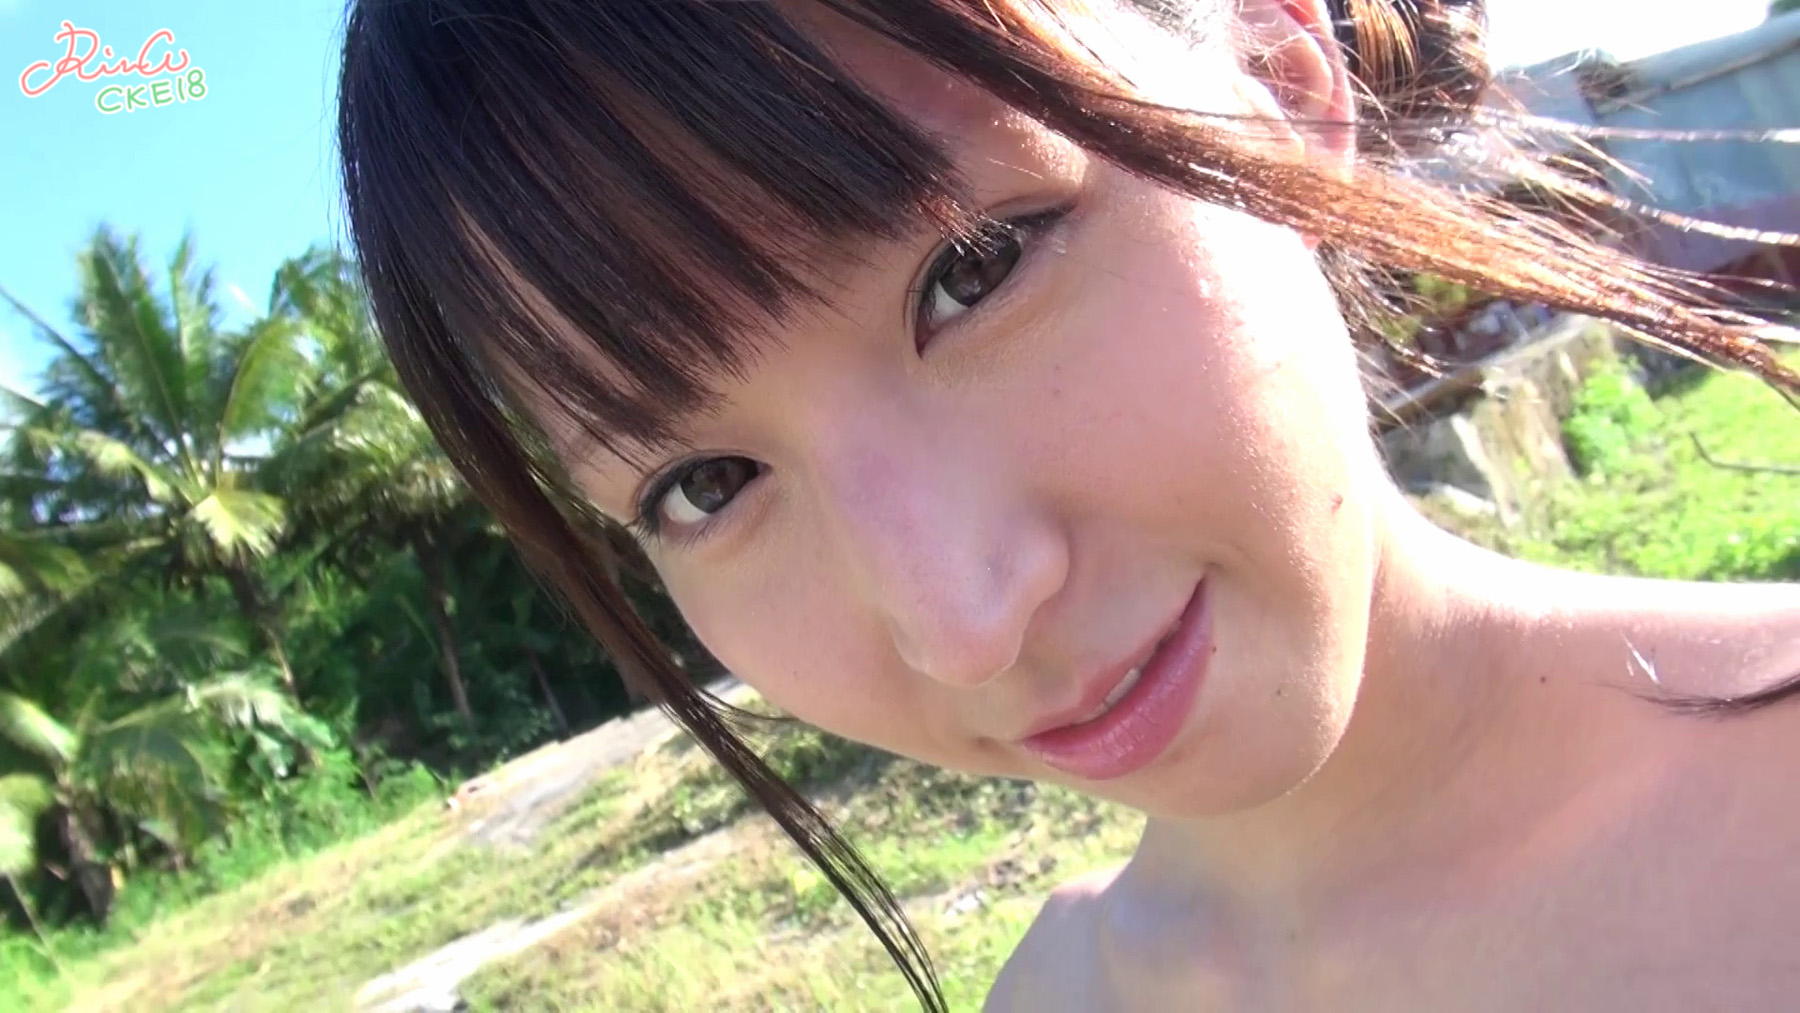 A Cup Breast Nude - The thrill of being nude outdoors and having her perfect a-cup breasts  massaged in public was almost too exciting for this Japanese cutie to  handle.